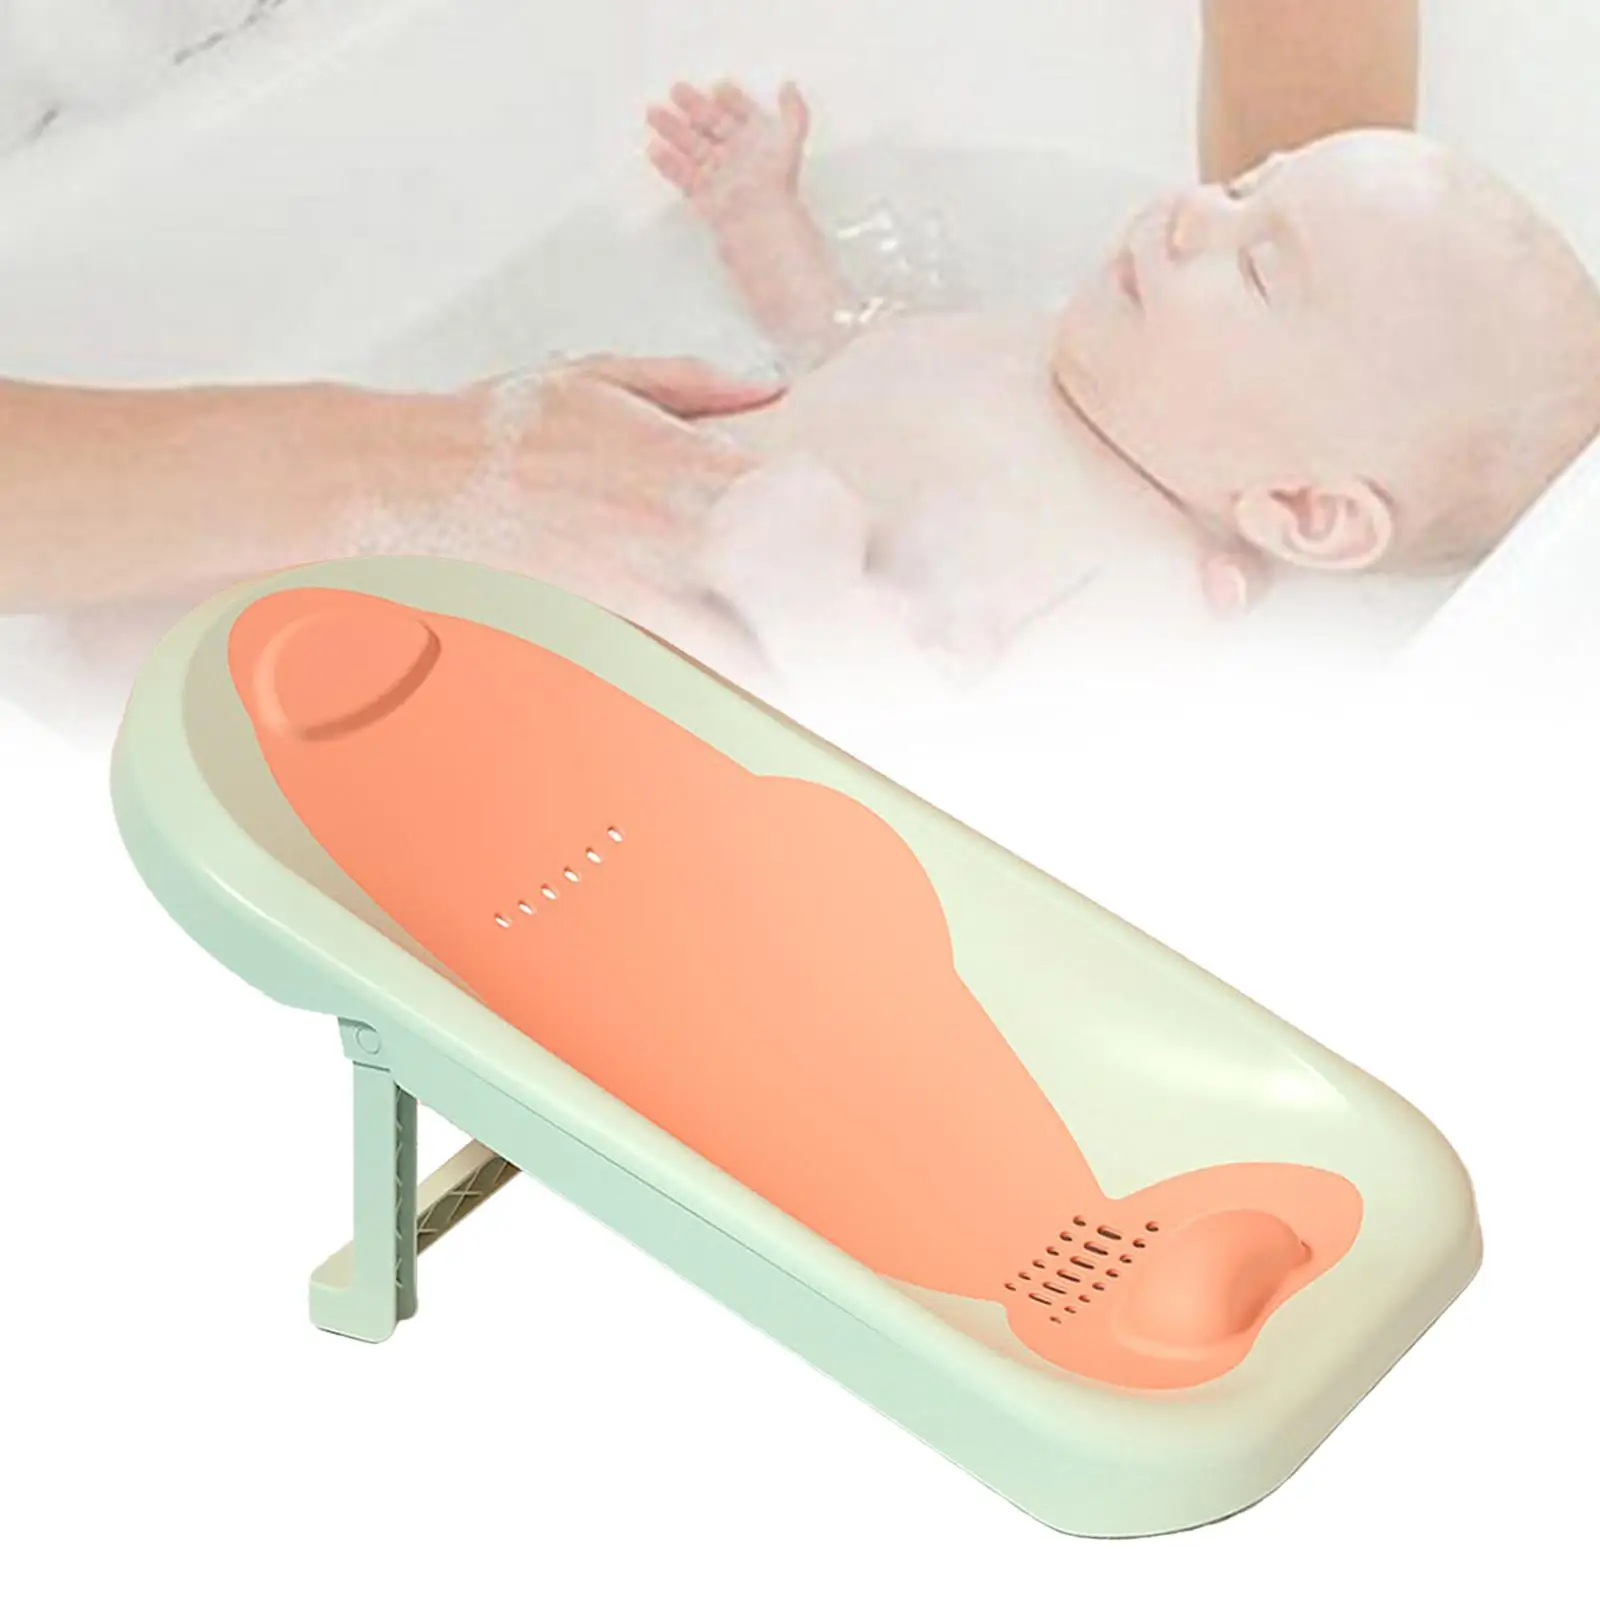 bath Seat Support Rack Lounger Kids Use from Birth until Sitting up Shower Rack for Baby Infant